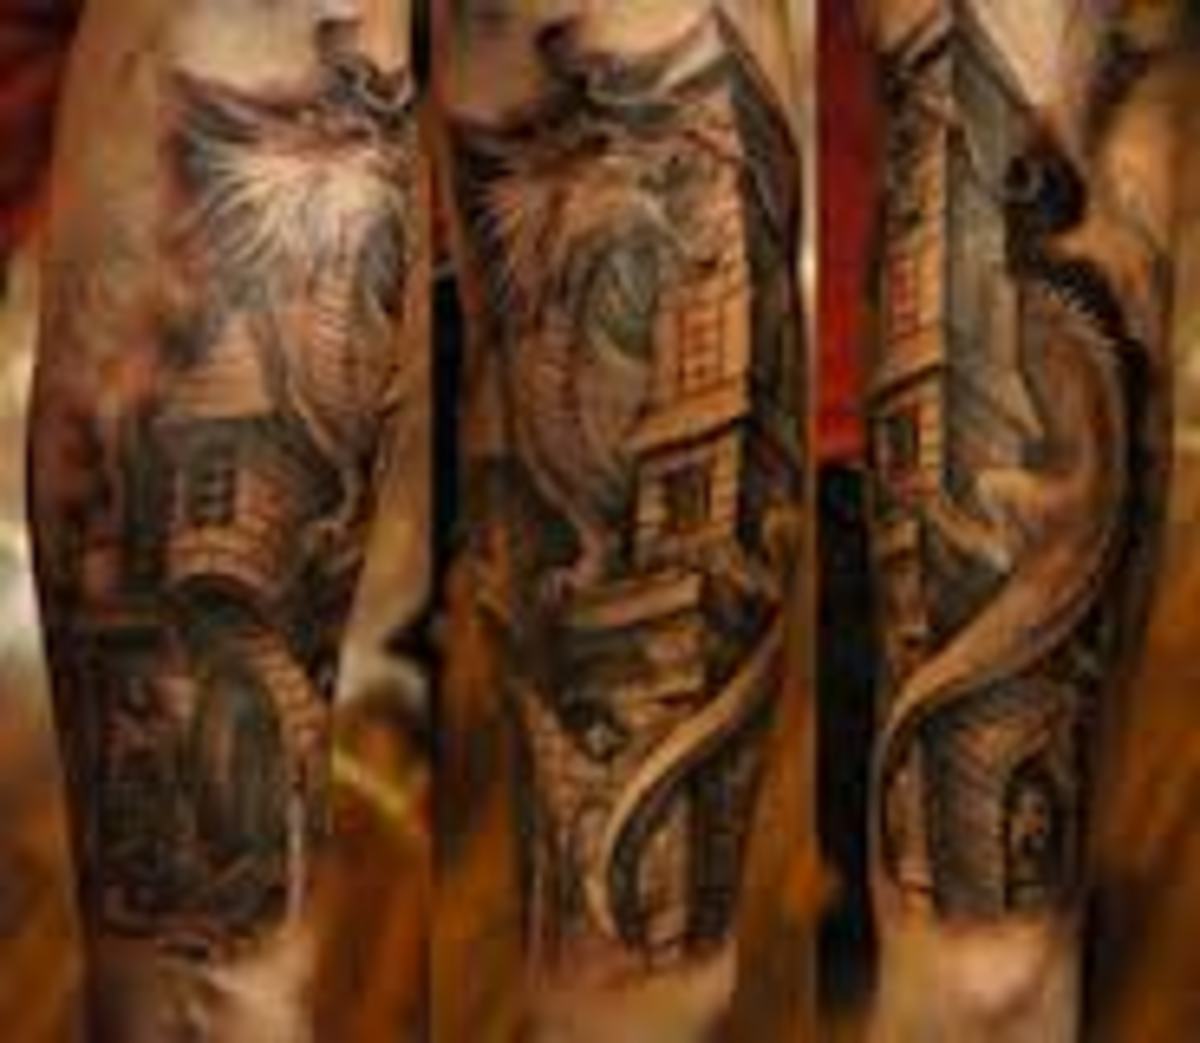 Castle Tattoo Designs And Meanings-Castle Tattoo Ideas And Pictures -  HubPages